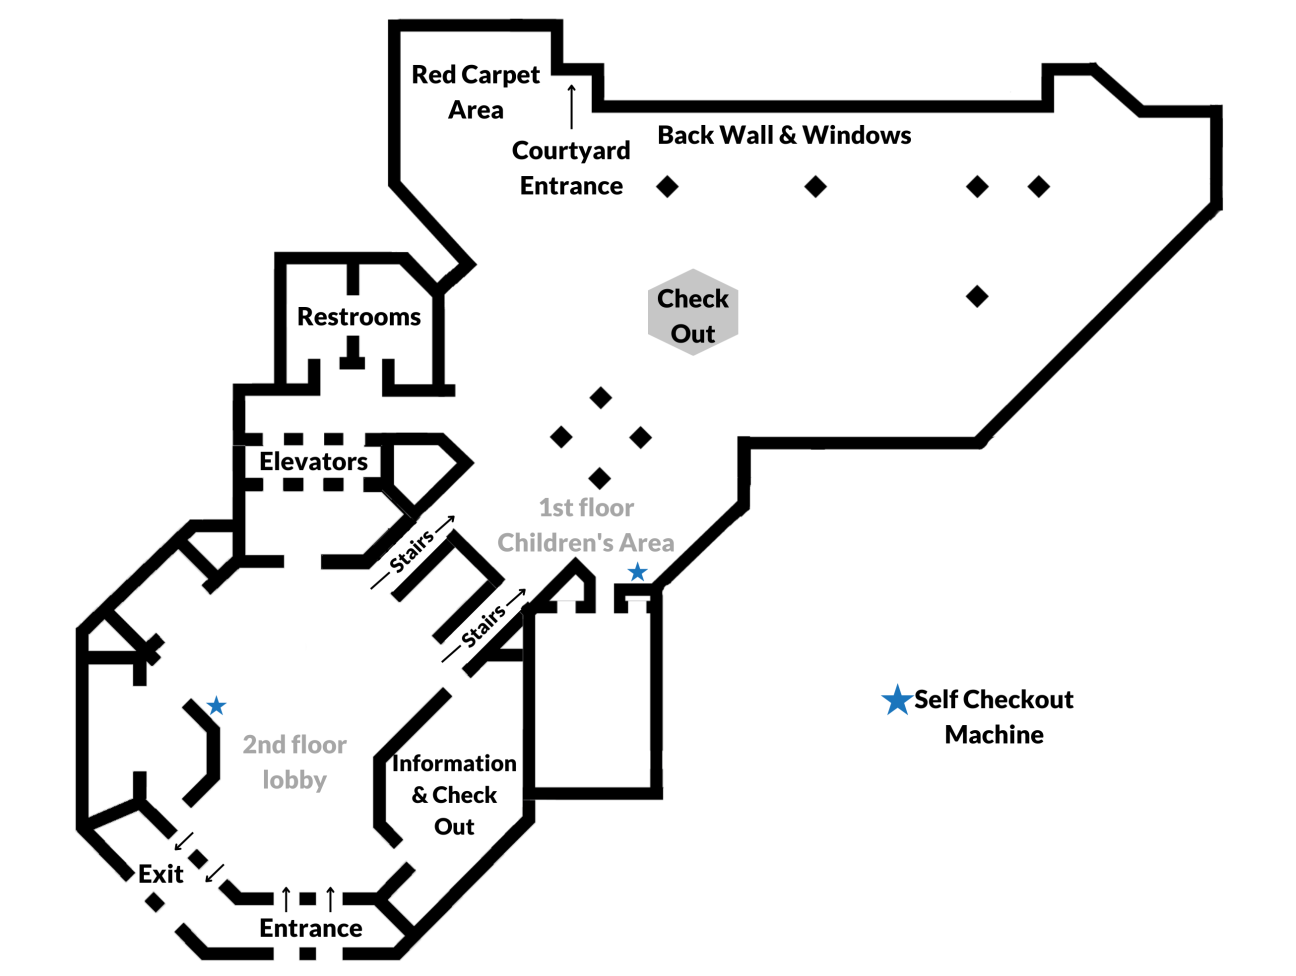 A floorplan of the Headquarters lobby (second floor) and children's area (first floor). The relevant areas for the event are marked on the map. This map has been updated as of 4/19/2023.